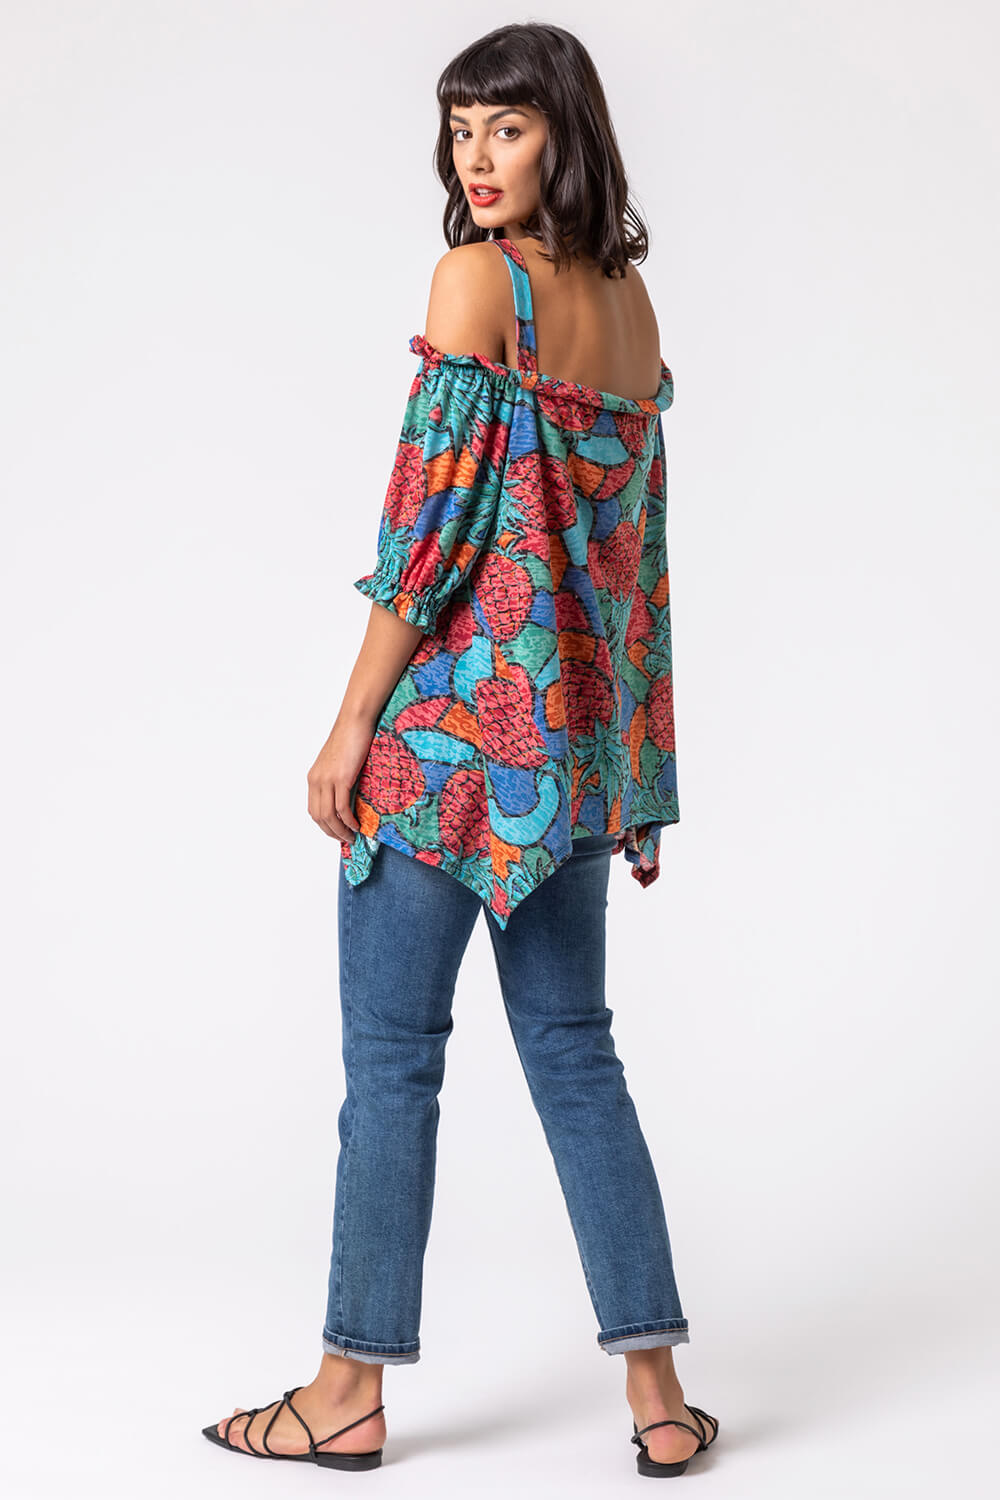 Turquoise Burnout Pineapple Print Cold Shoulder Top, Image 2 of 4